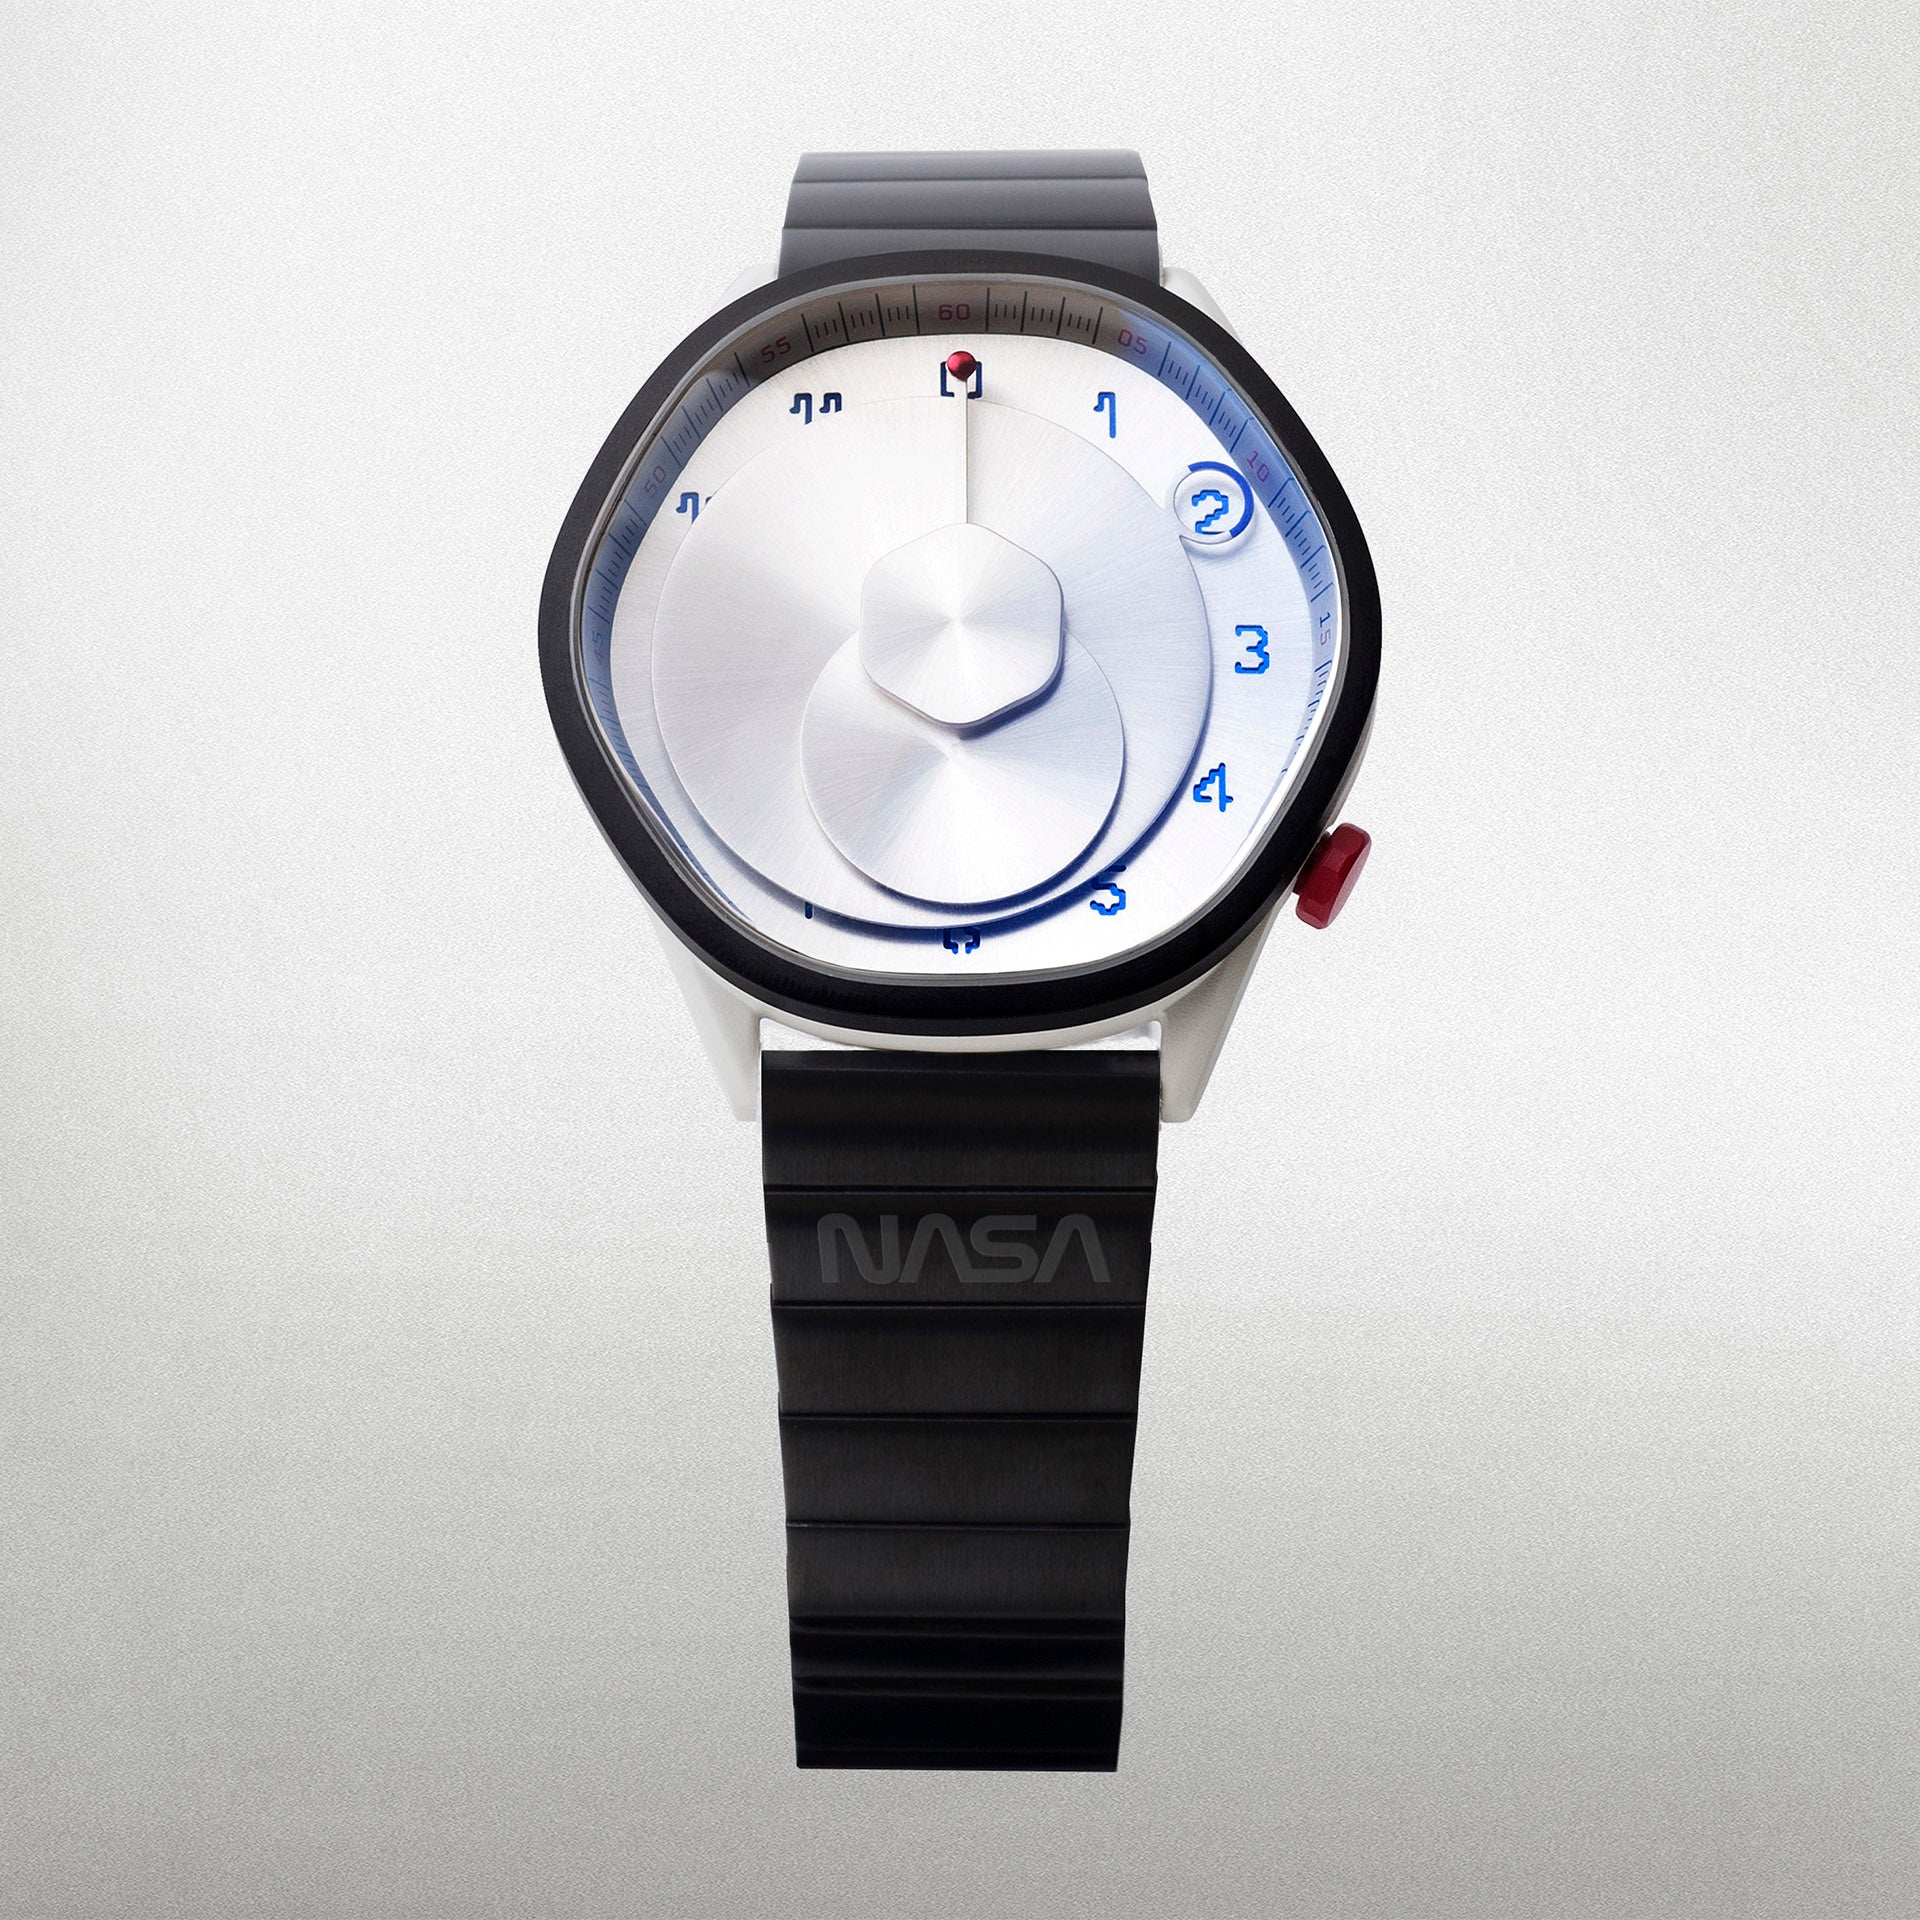 NASA "Lunar Sample Return" The Moon Time - LIMITED EDITION (300 Pieces Worldwide)